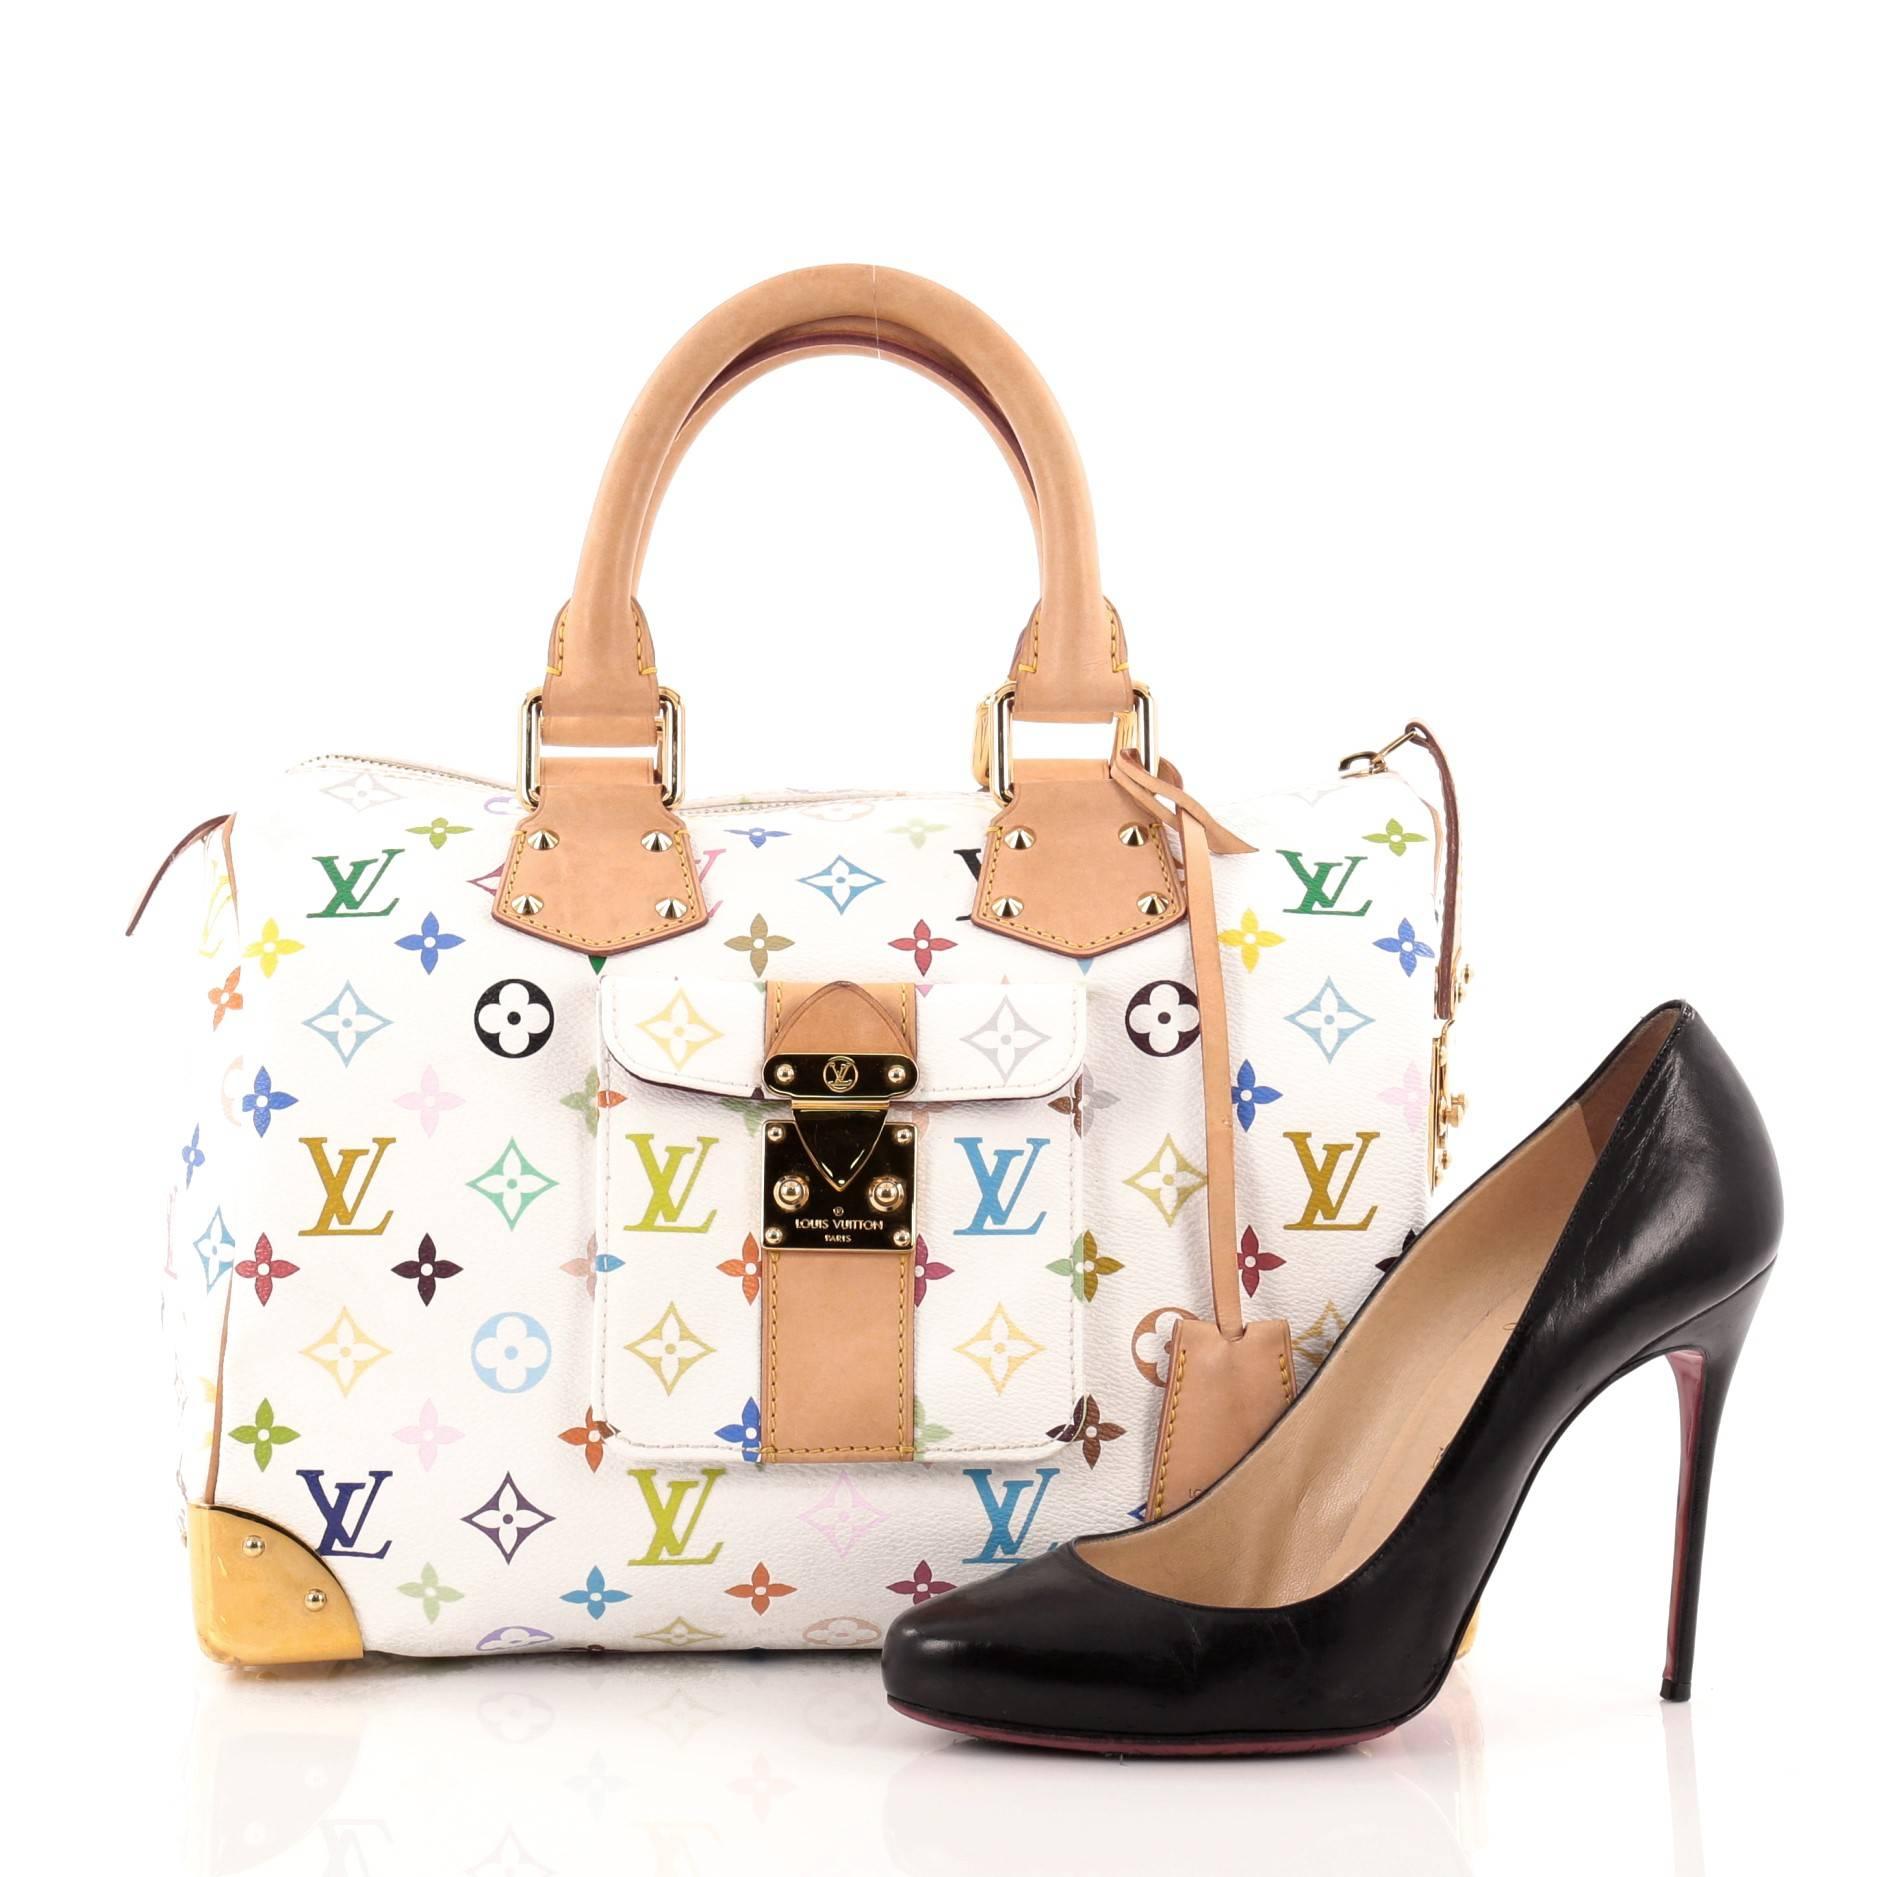 This authentic Louis Vuitton Speedy Monogram Multicolor 30 is vibrant and elegant, made for a sophisticated traveling fashionista. Crafted from Louis Vuitton’s signature white monogram multicolor print coated canvas, this iconic bag features